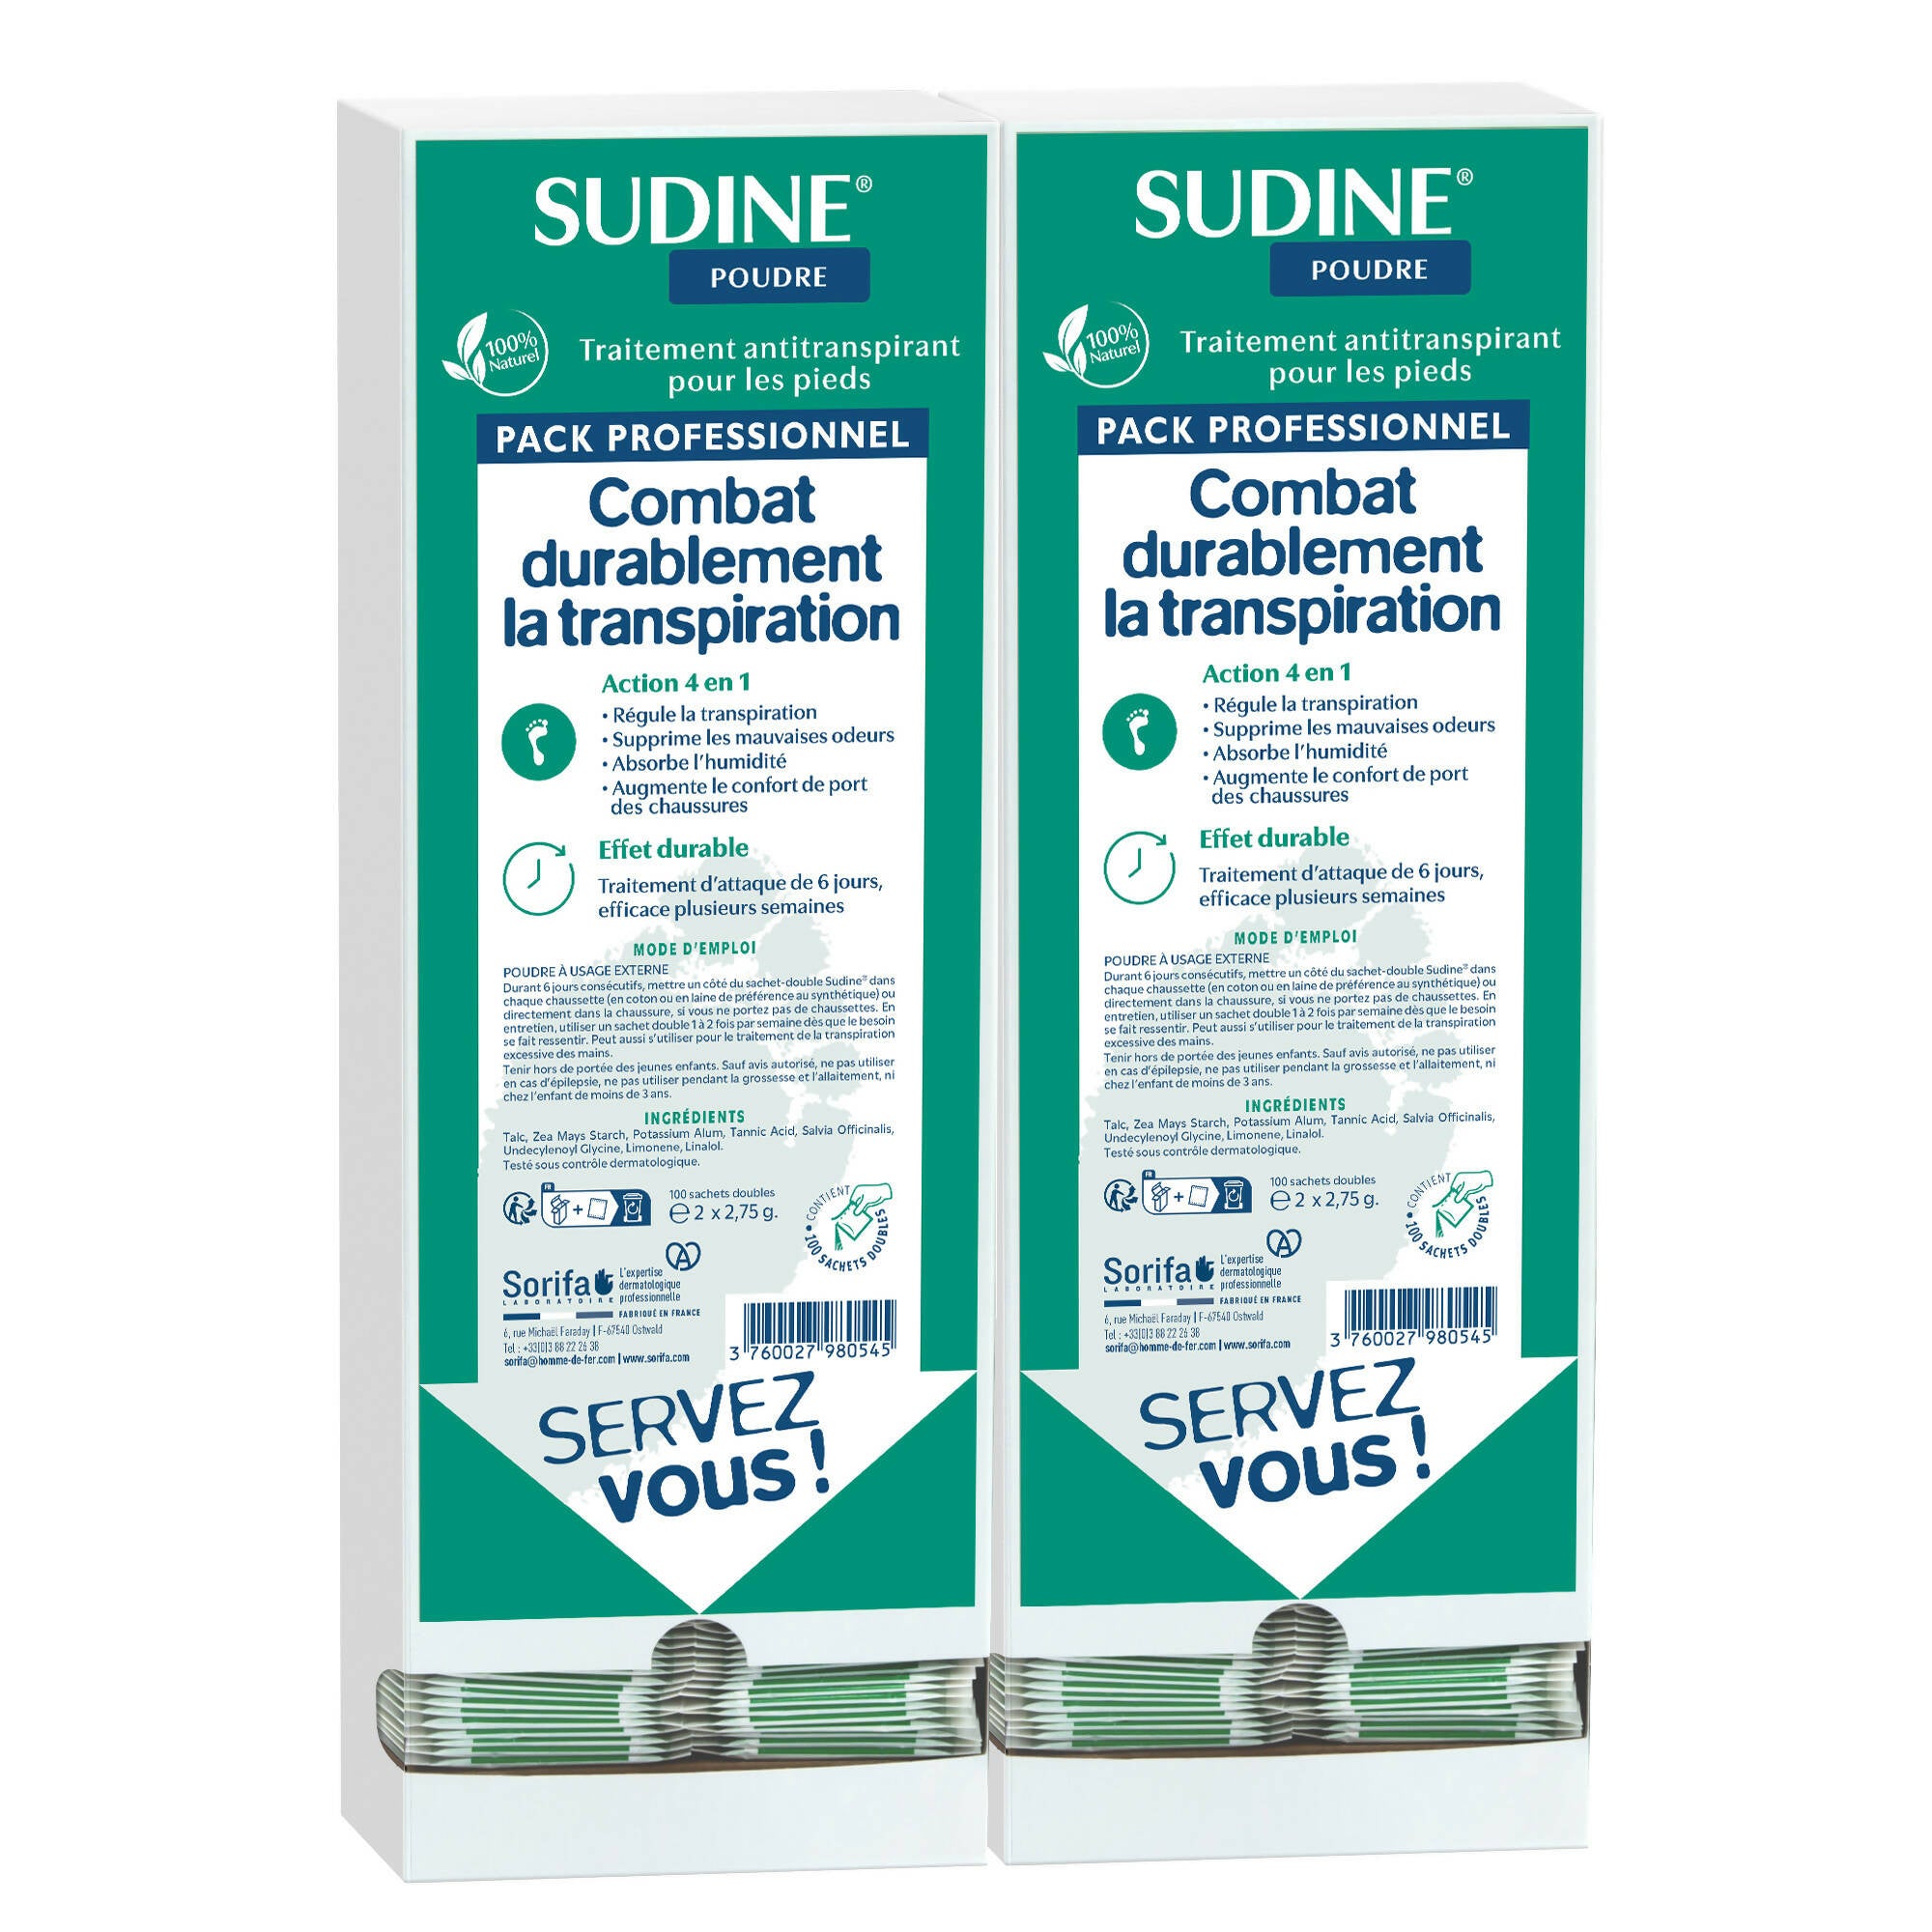 SORIFA - Set of 2 - Sudine Powder Antiperspirant Treatment - Foot - Regulates perspiration - Absorbs - Prevents mycoses - Without aluminum salts - Made in France - Box of 100 double sachets